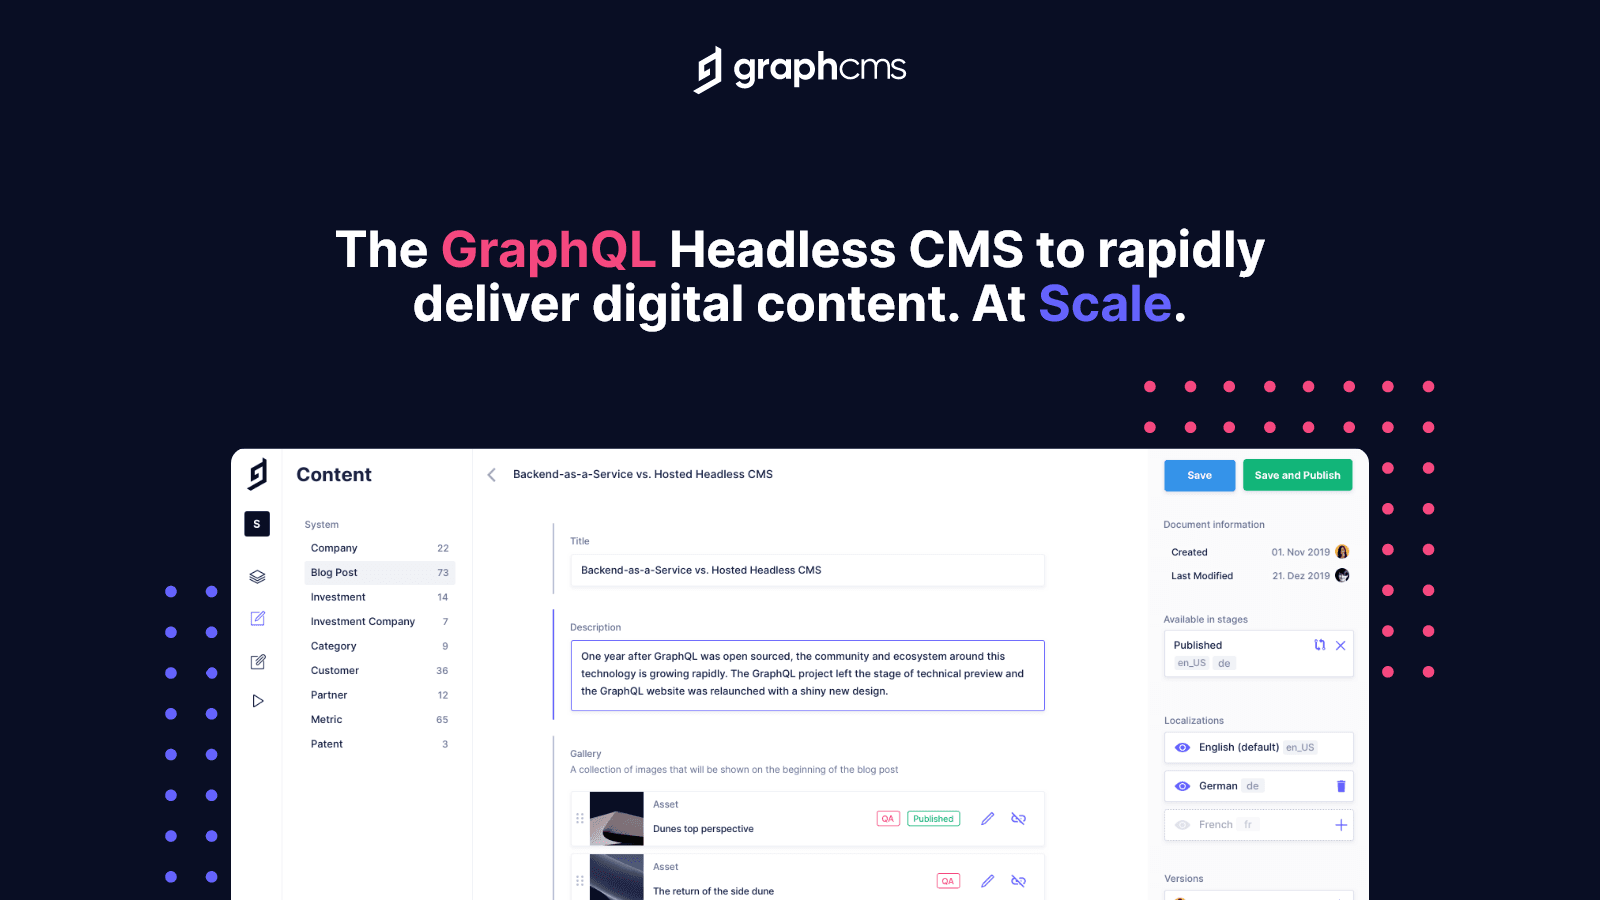 Why we invested in GraphCMS